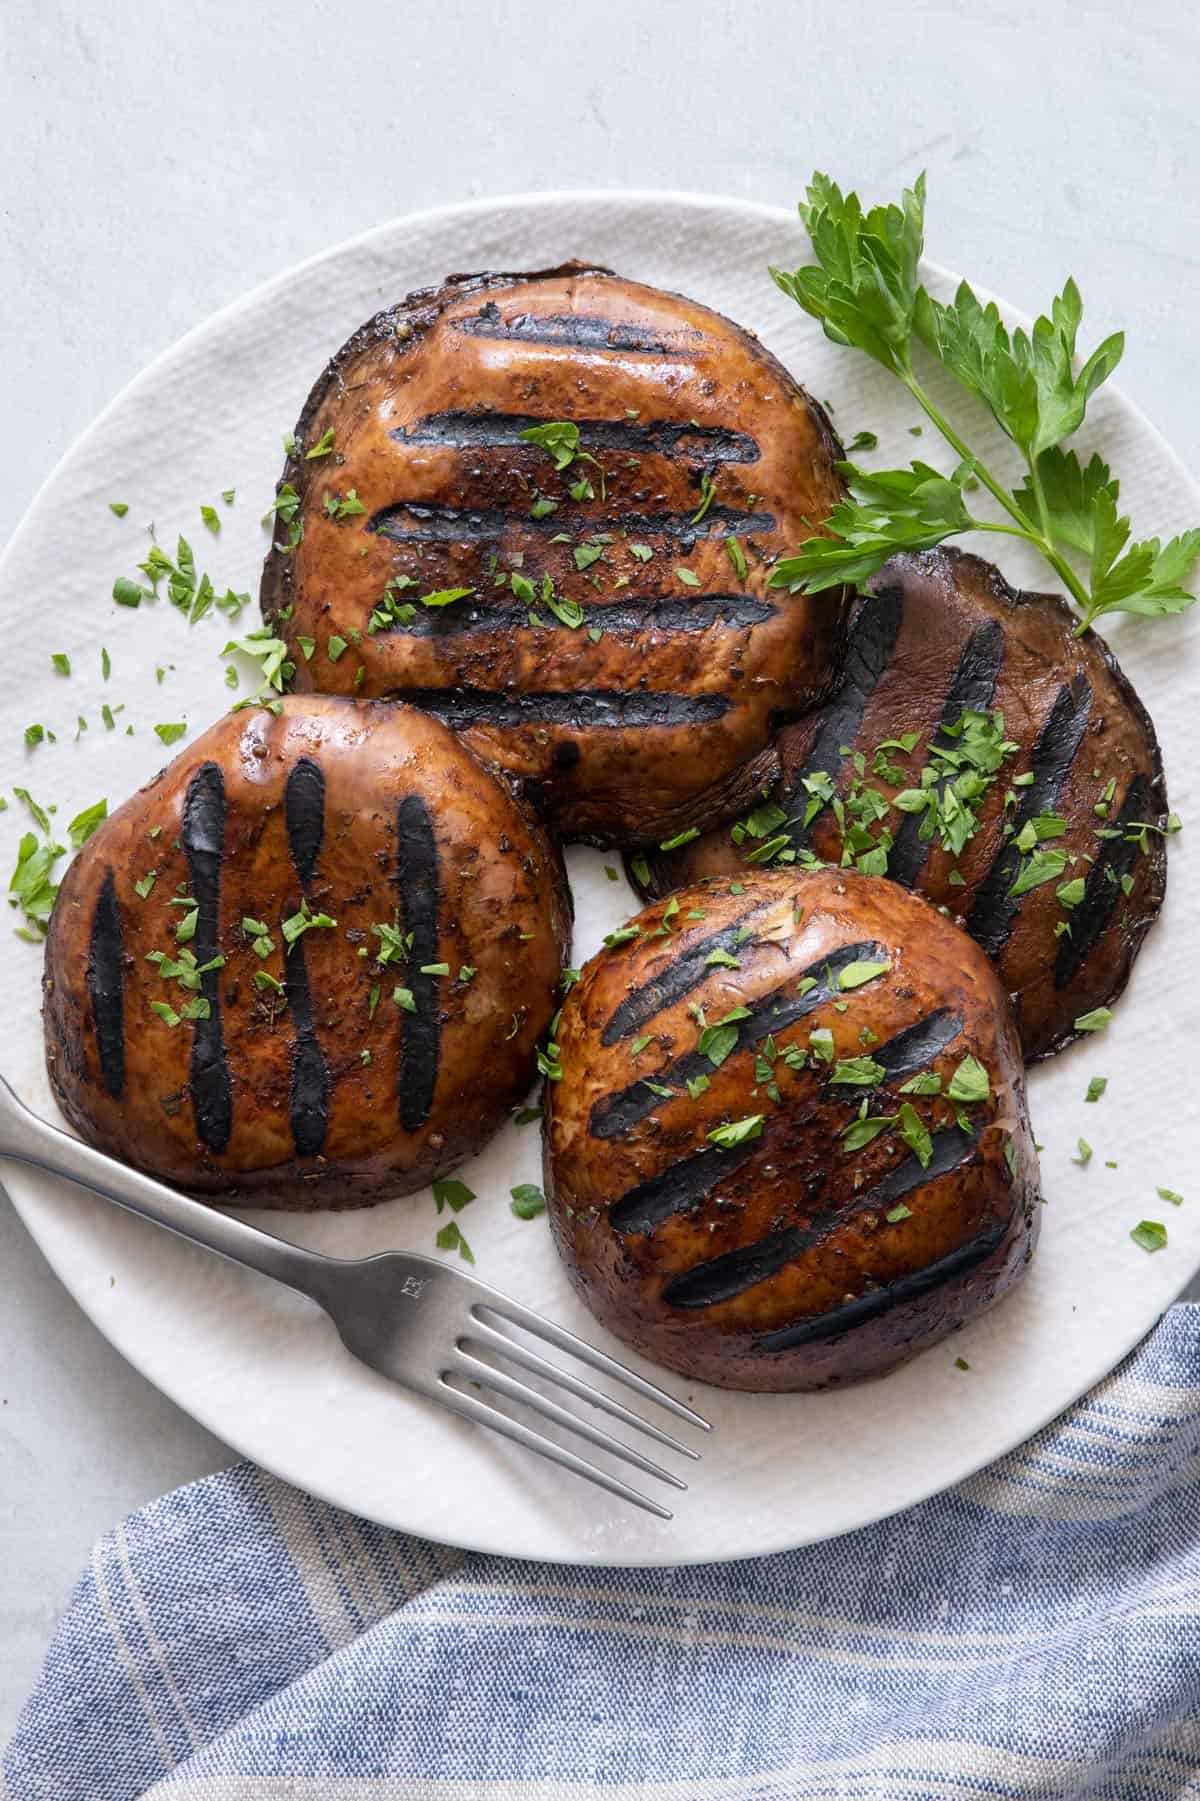 4 grilled mushrooms on a plate garnished with chopped parsley.